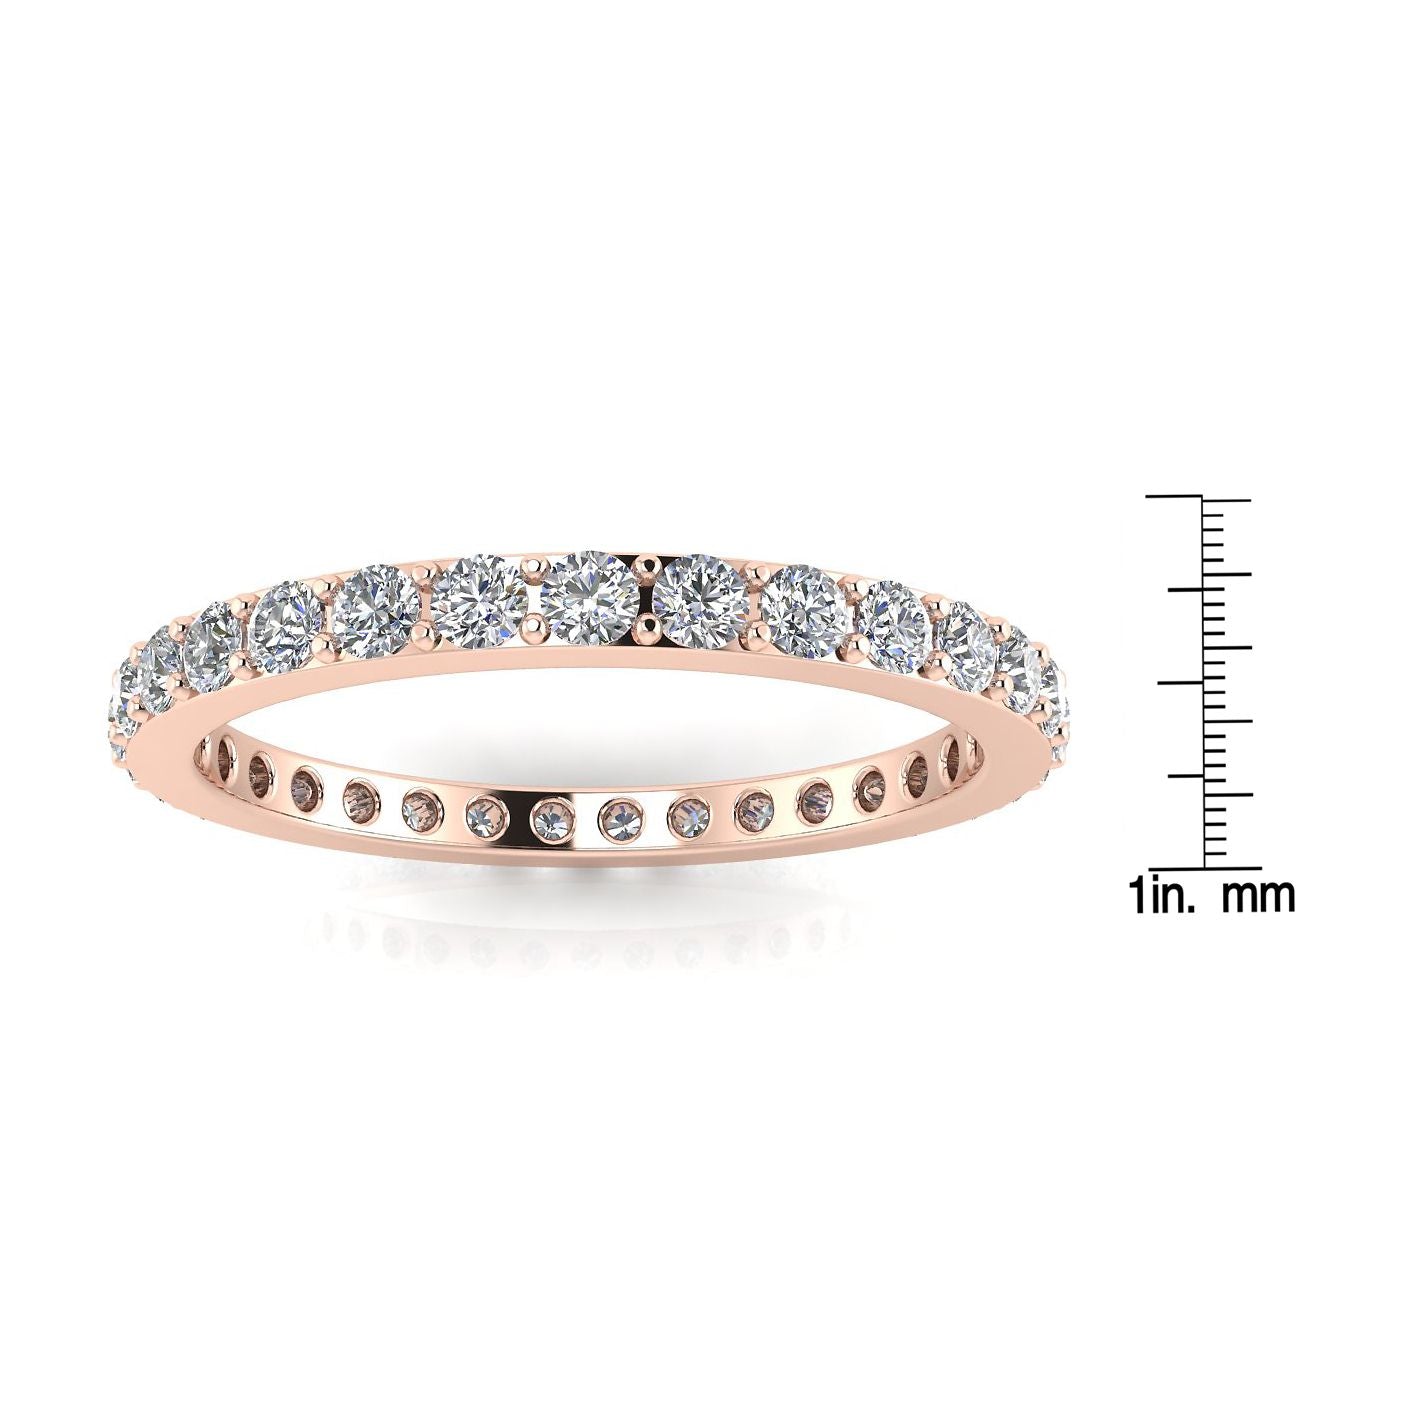 Round Brilliant Cut Diamond Pave Set Eternity Ring In 14k Rose Gold  (1.43ct. Tw.) Ring Size 6